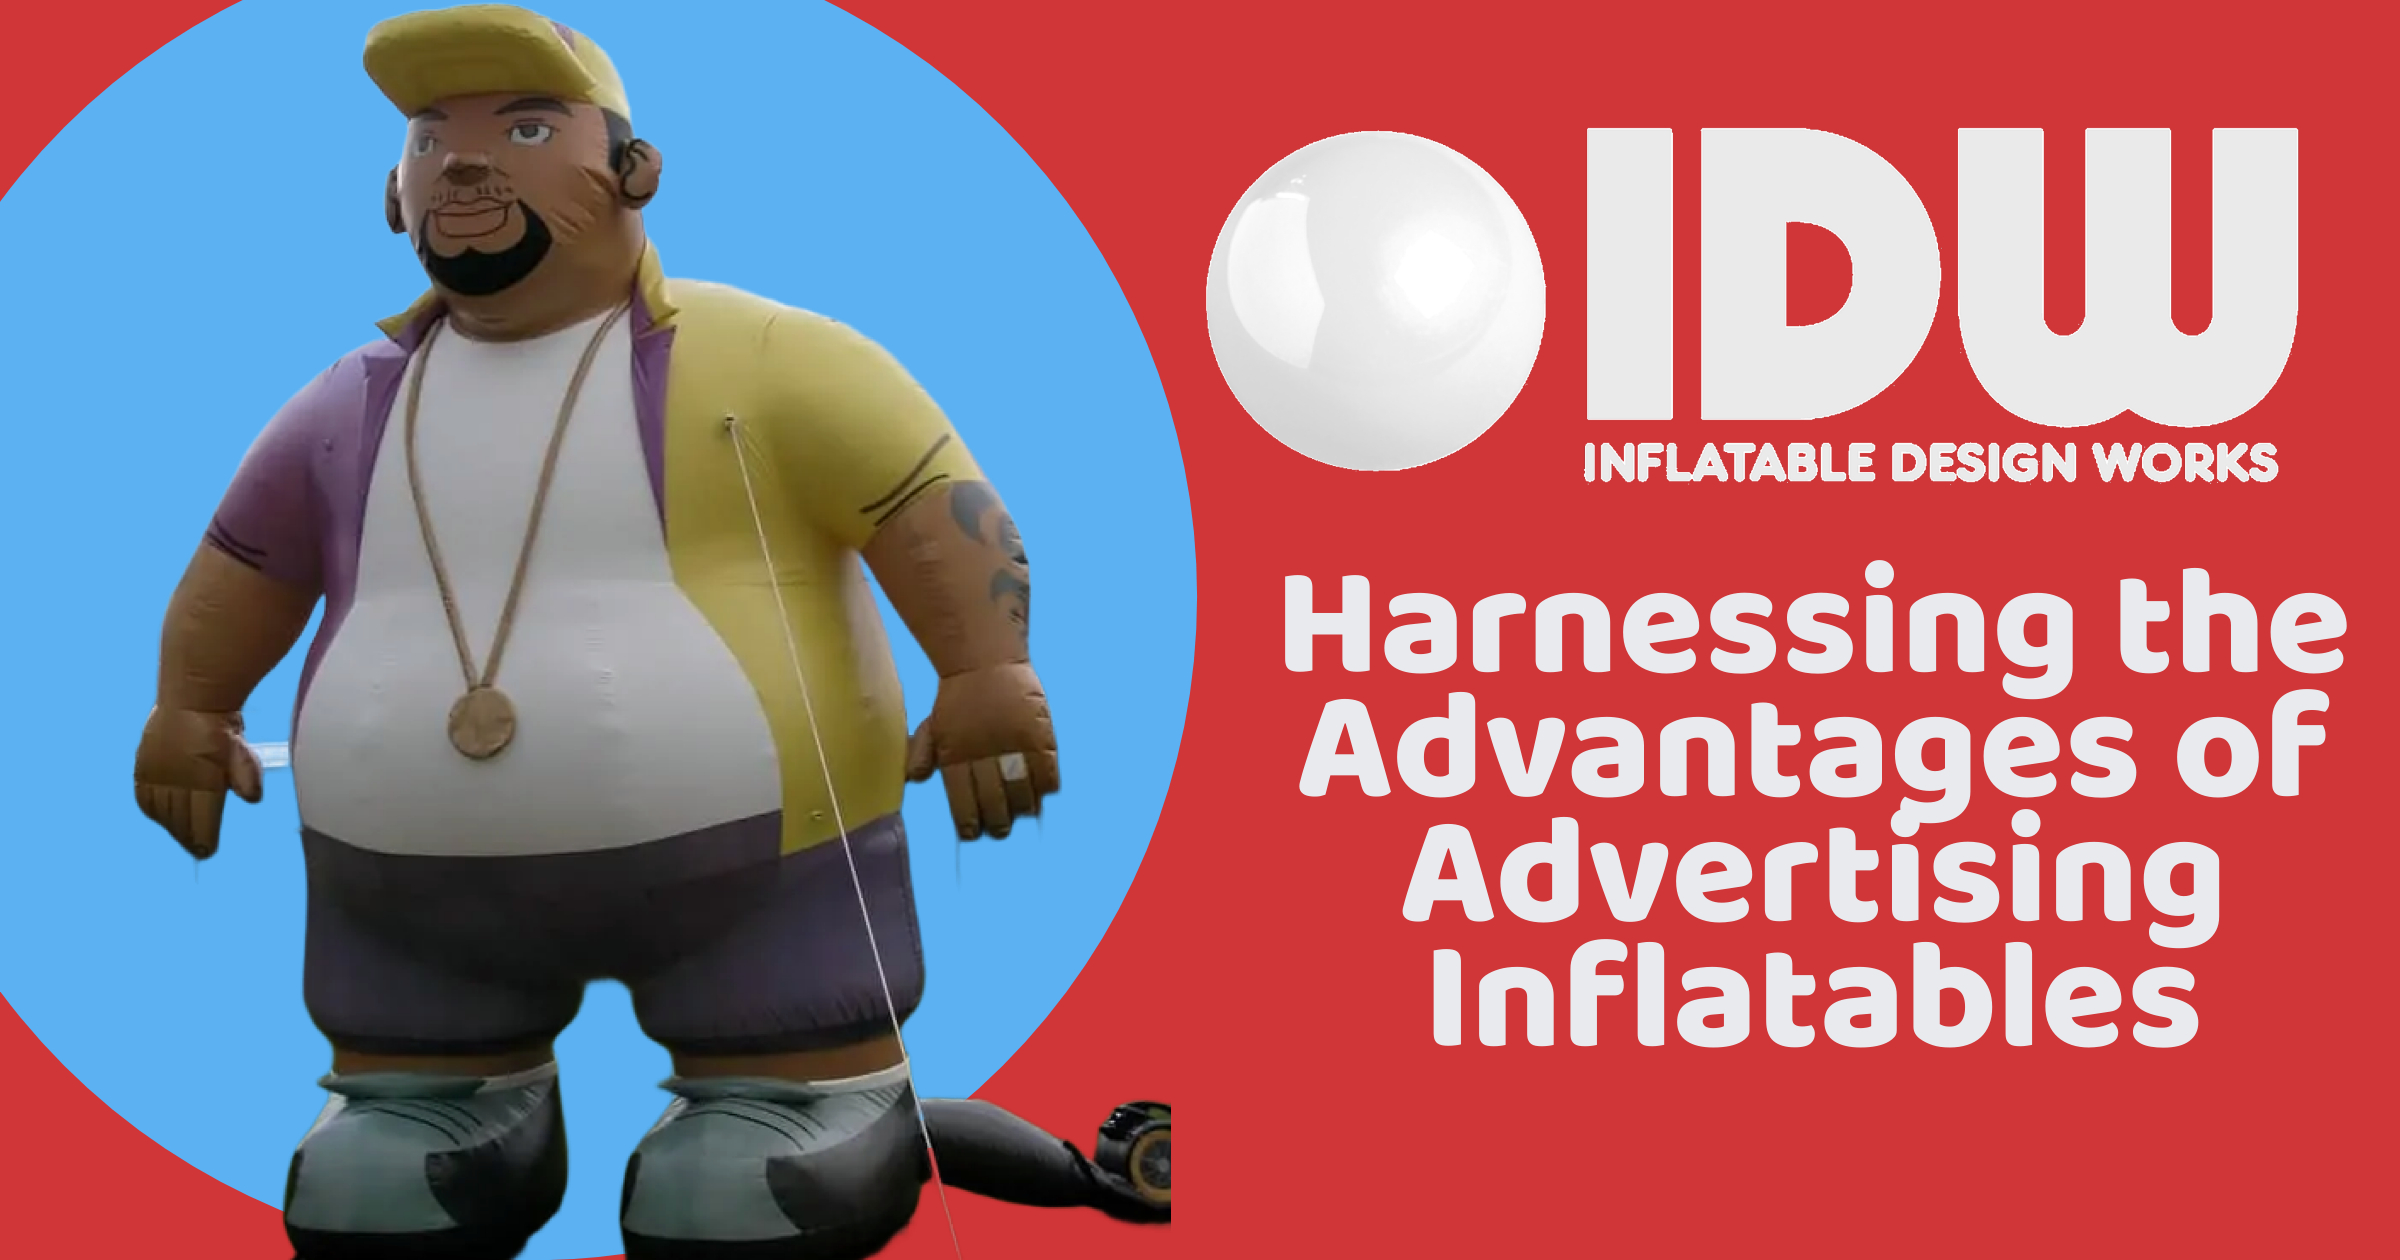 Harnessing the Advantages of Advertising Inflatables